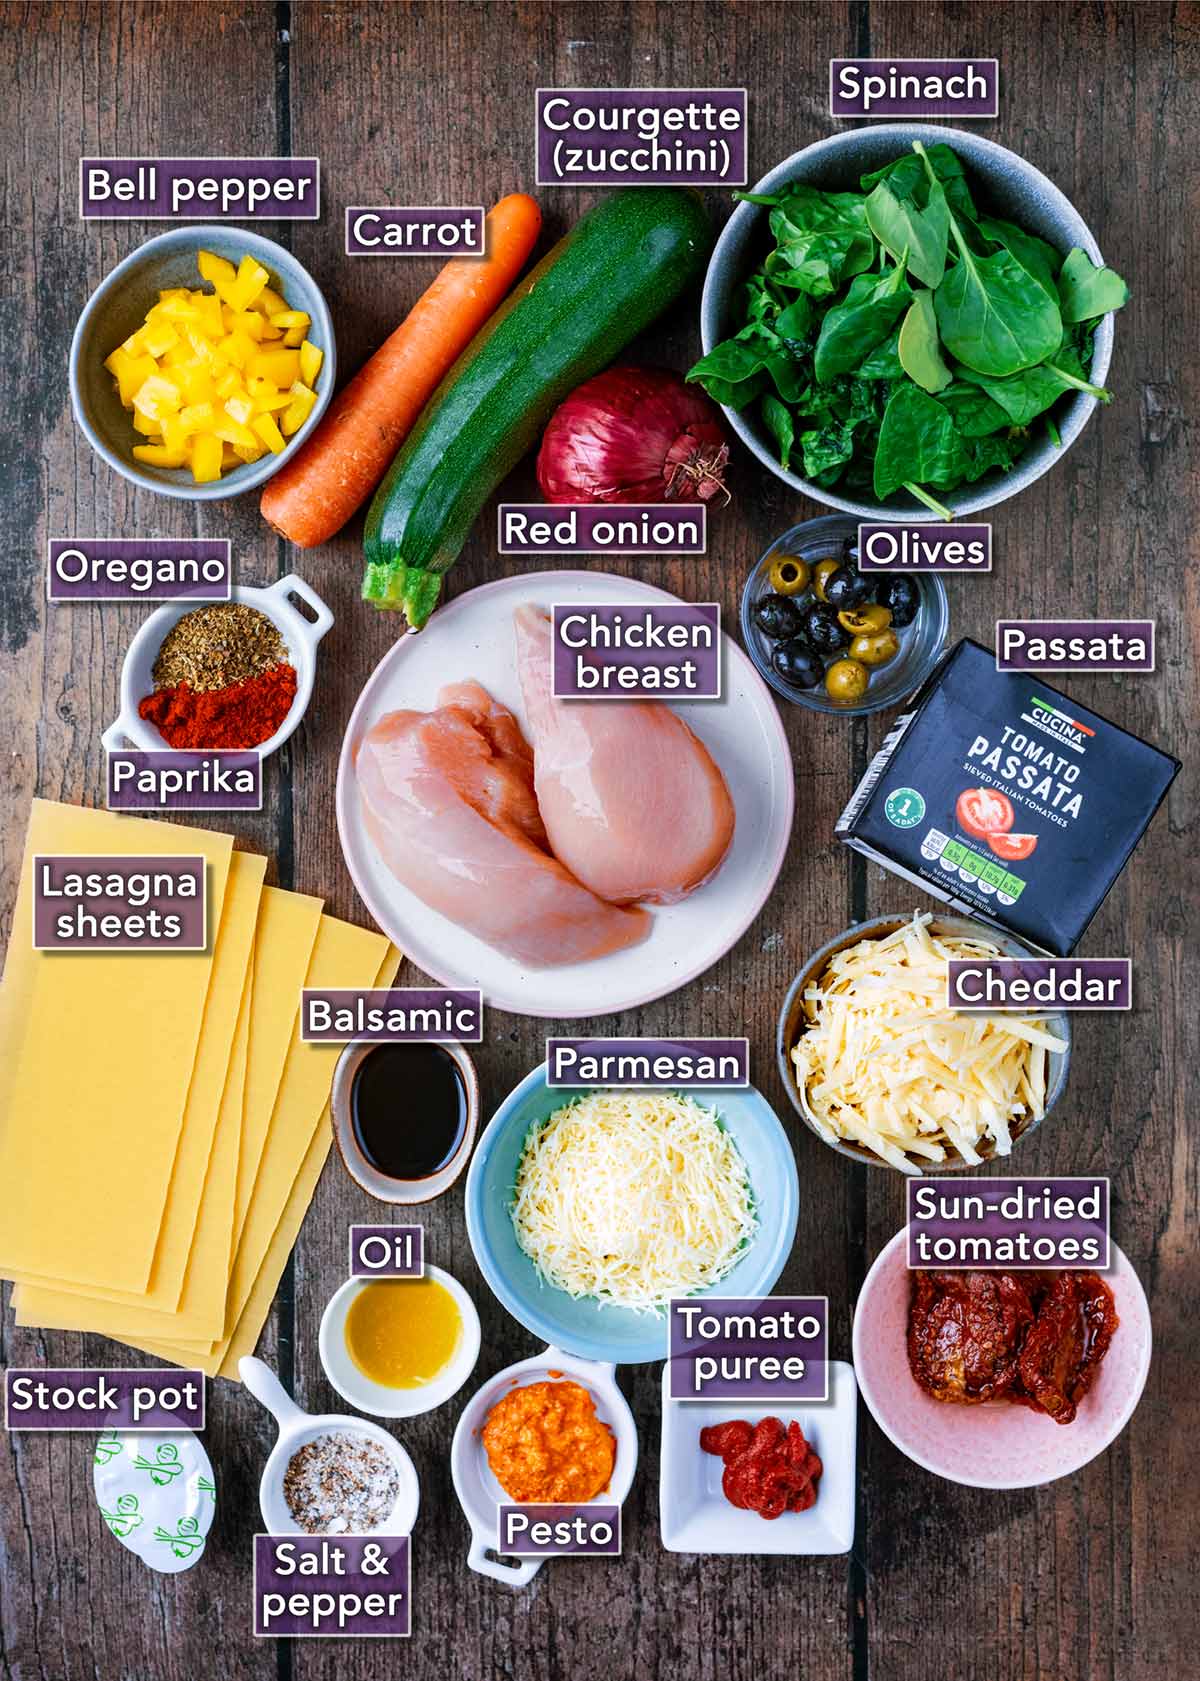 Some of the ingredients to make this recipe each with a text overlay label.